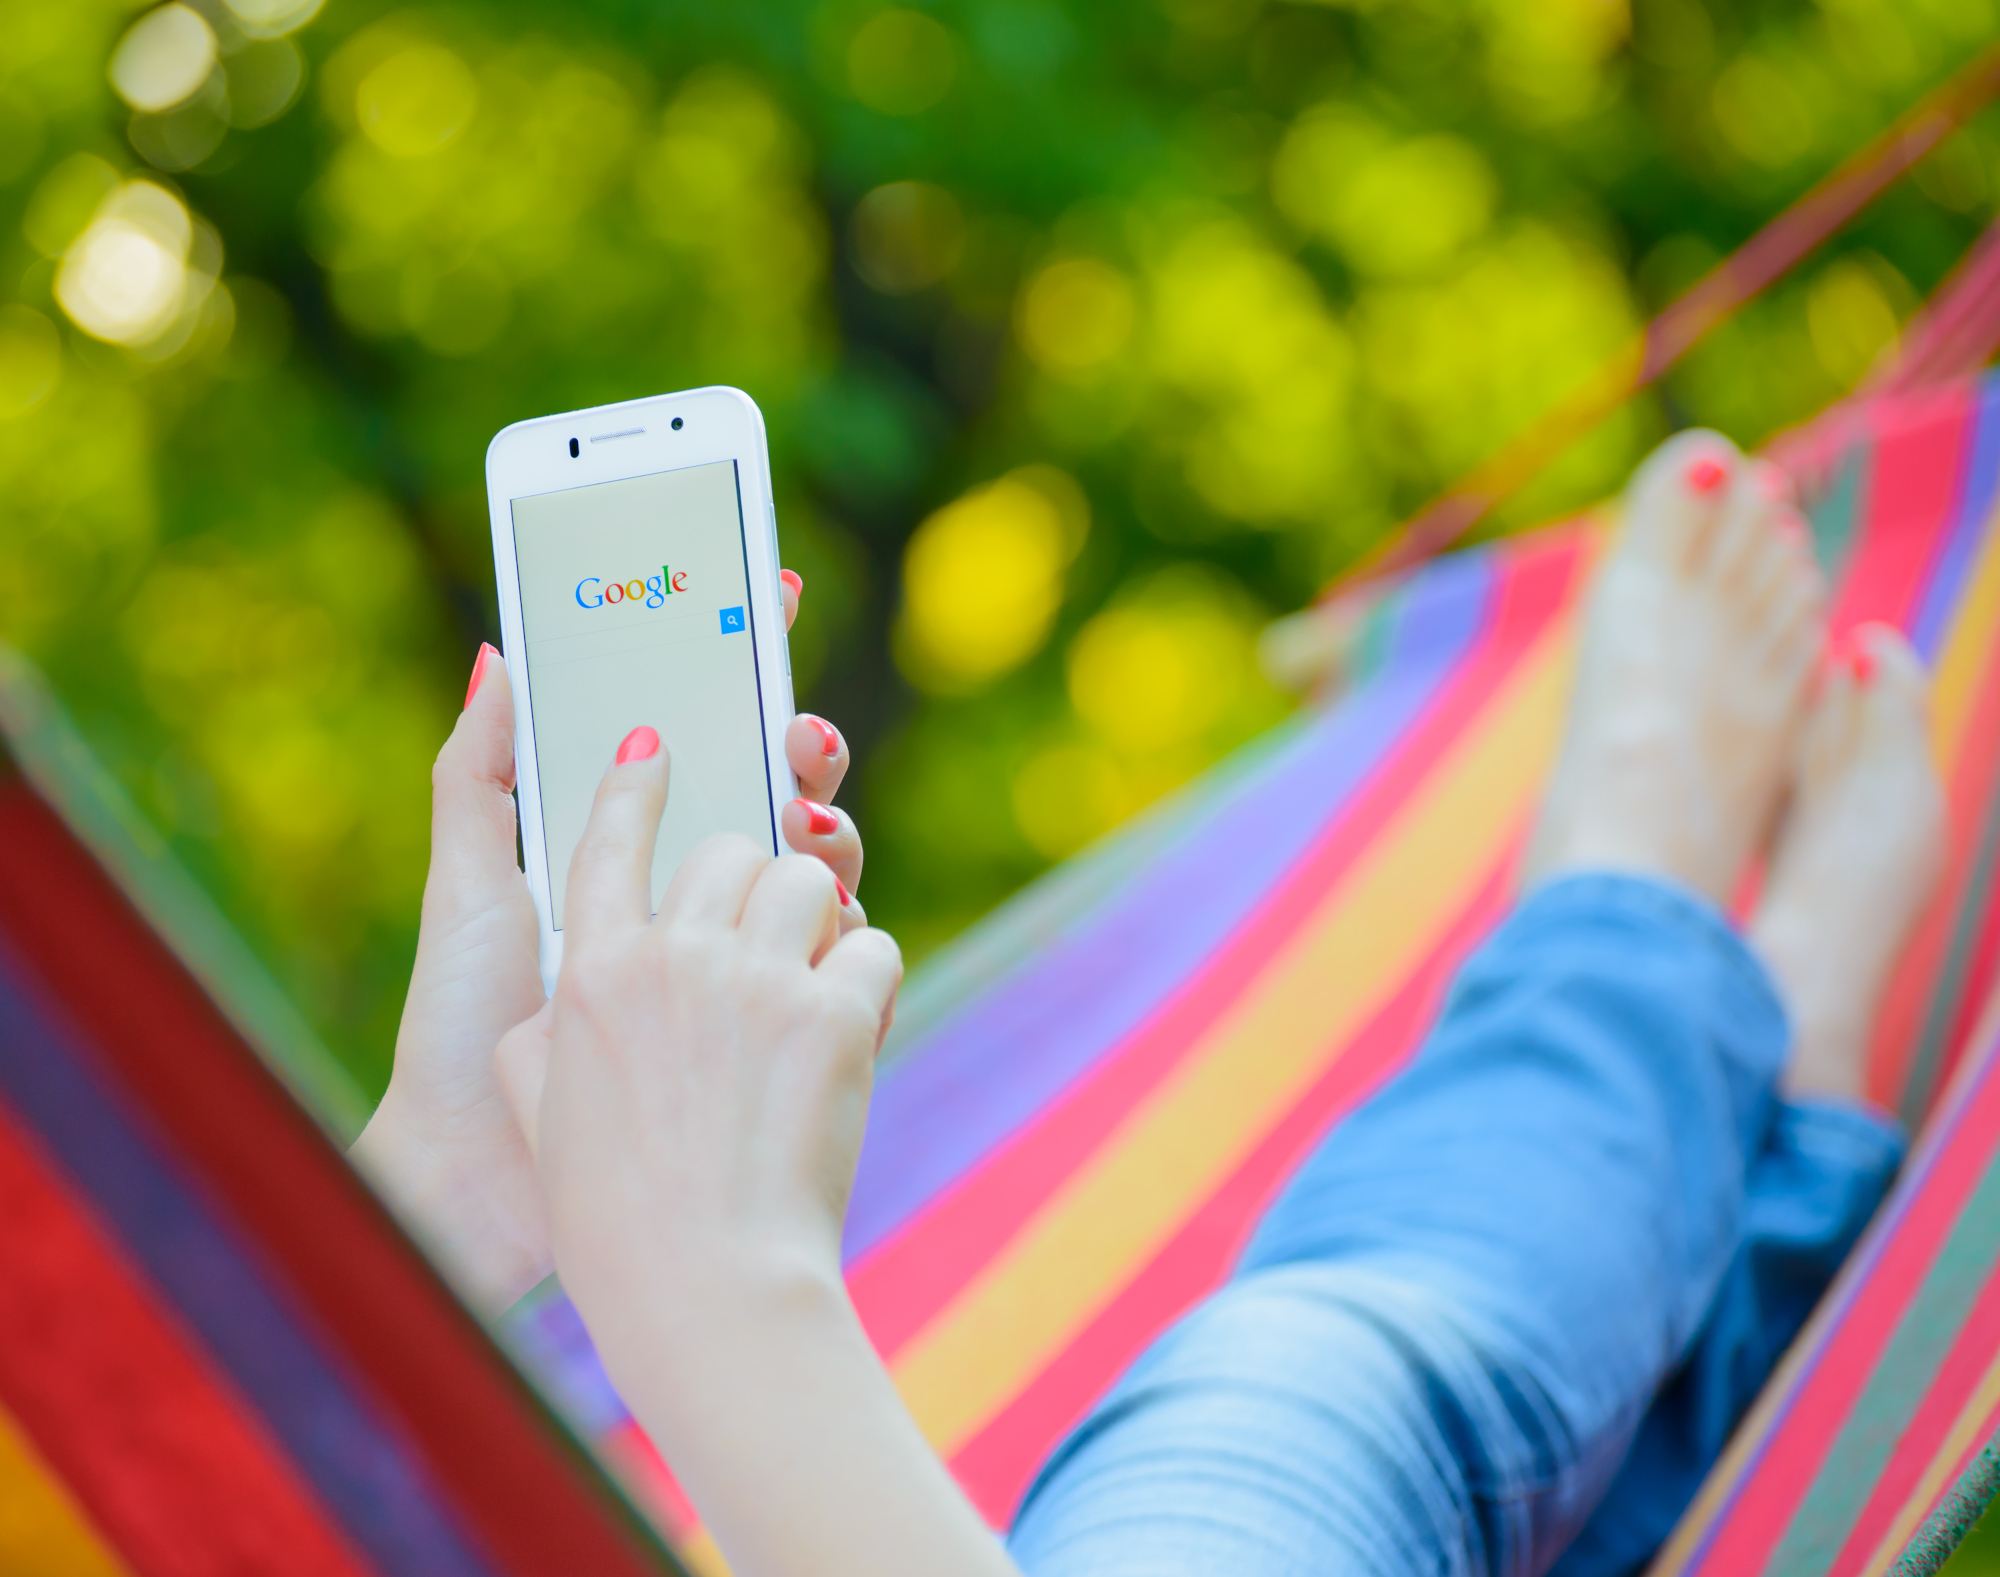 Caucasian woman with red nail polish using a cell phone searching Google for a website while laying in a rainbow-colored hammock